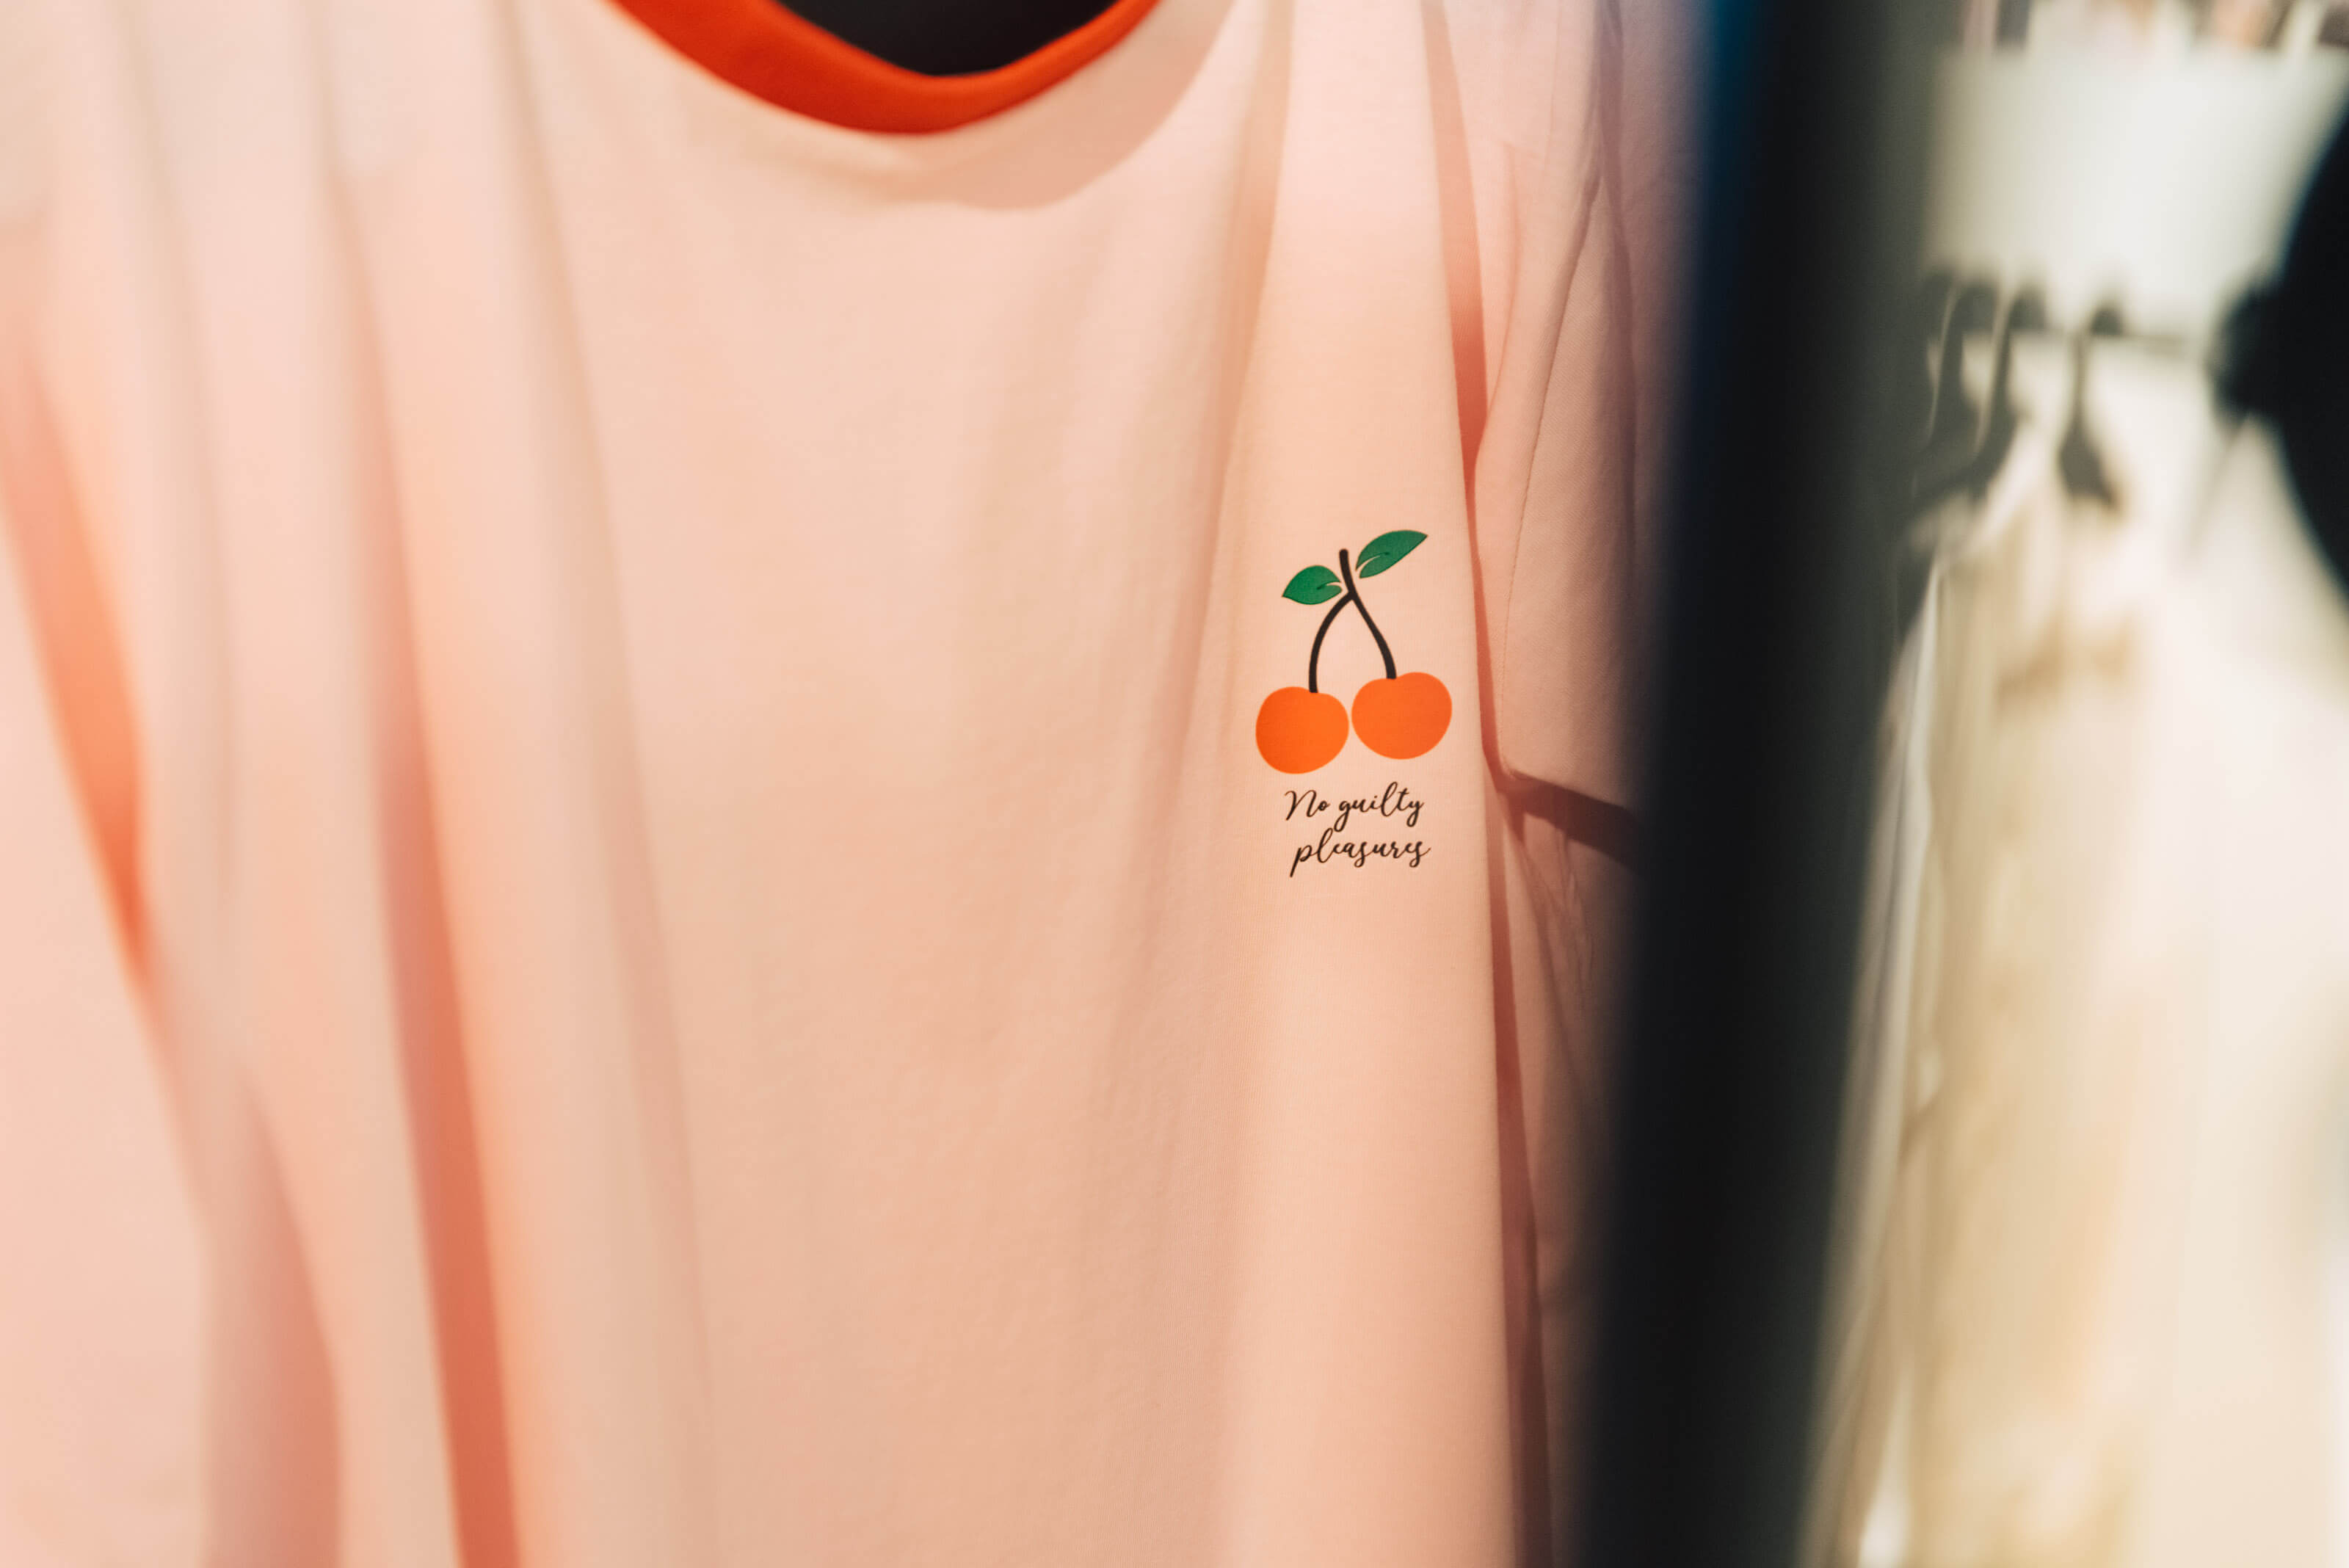 When life gives you oranges, make a t-shirt. |  